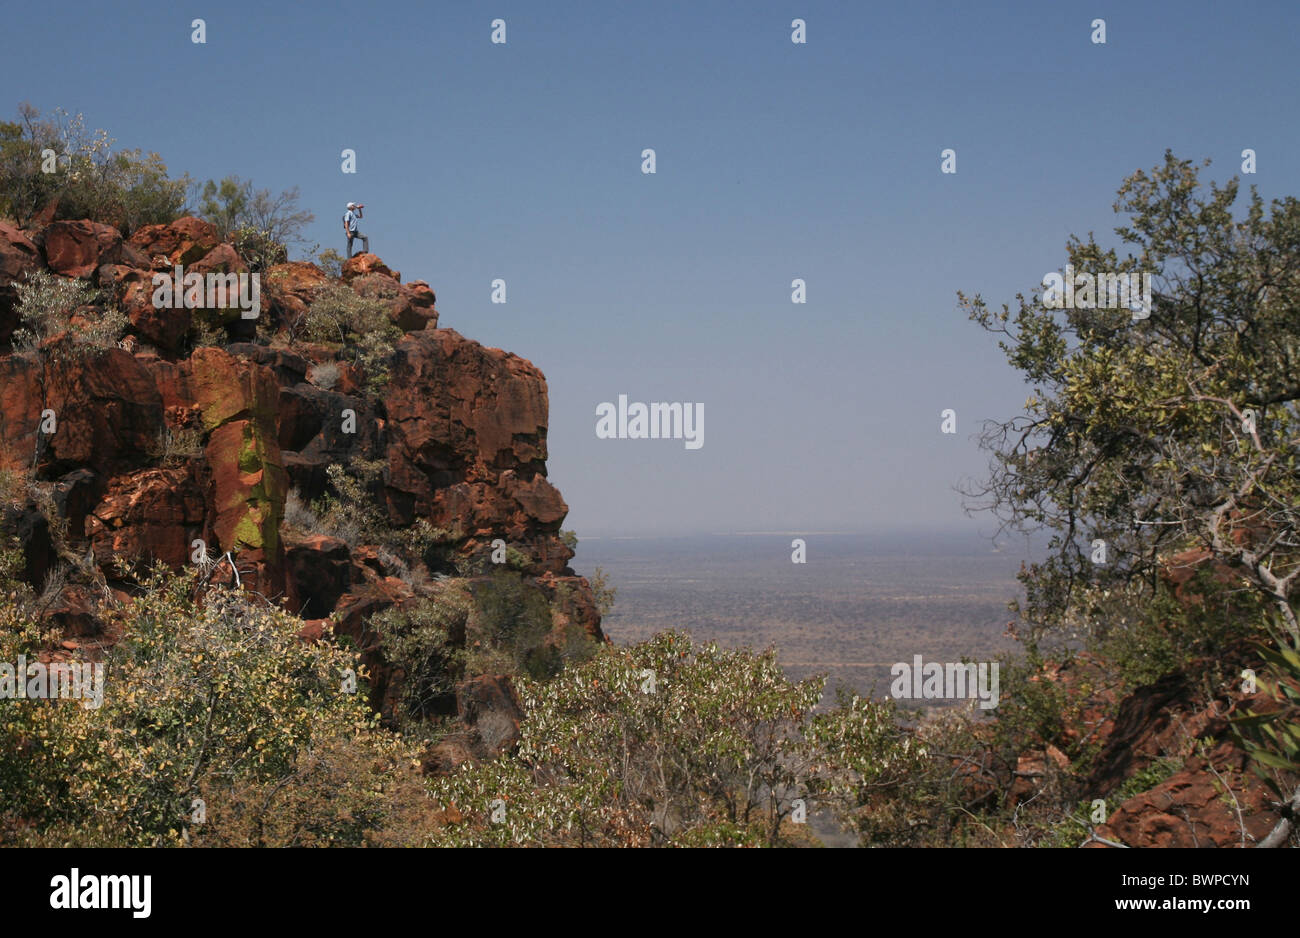 Namibia Africa Waterberg Summer 2007 Africa landscape nature mountain mountains rock man one person standi Stock Photo